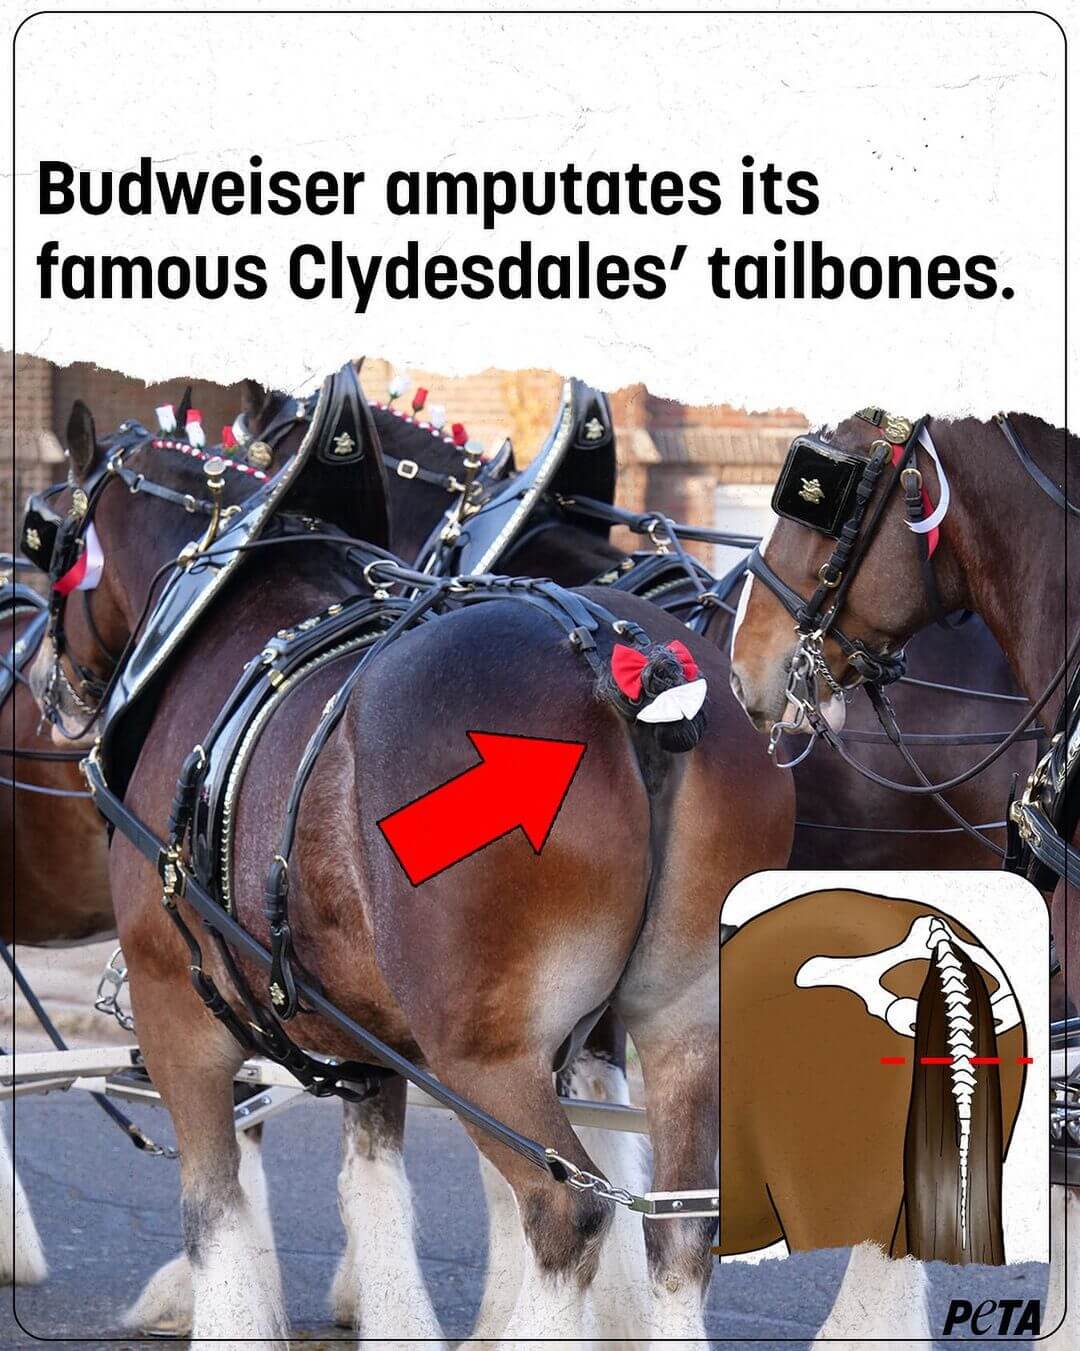 Budweiser won’t stop amputating the tailbones of its iconic Clydesdales.